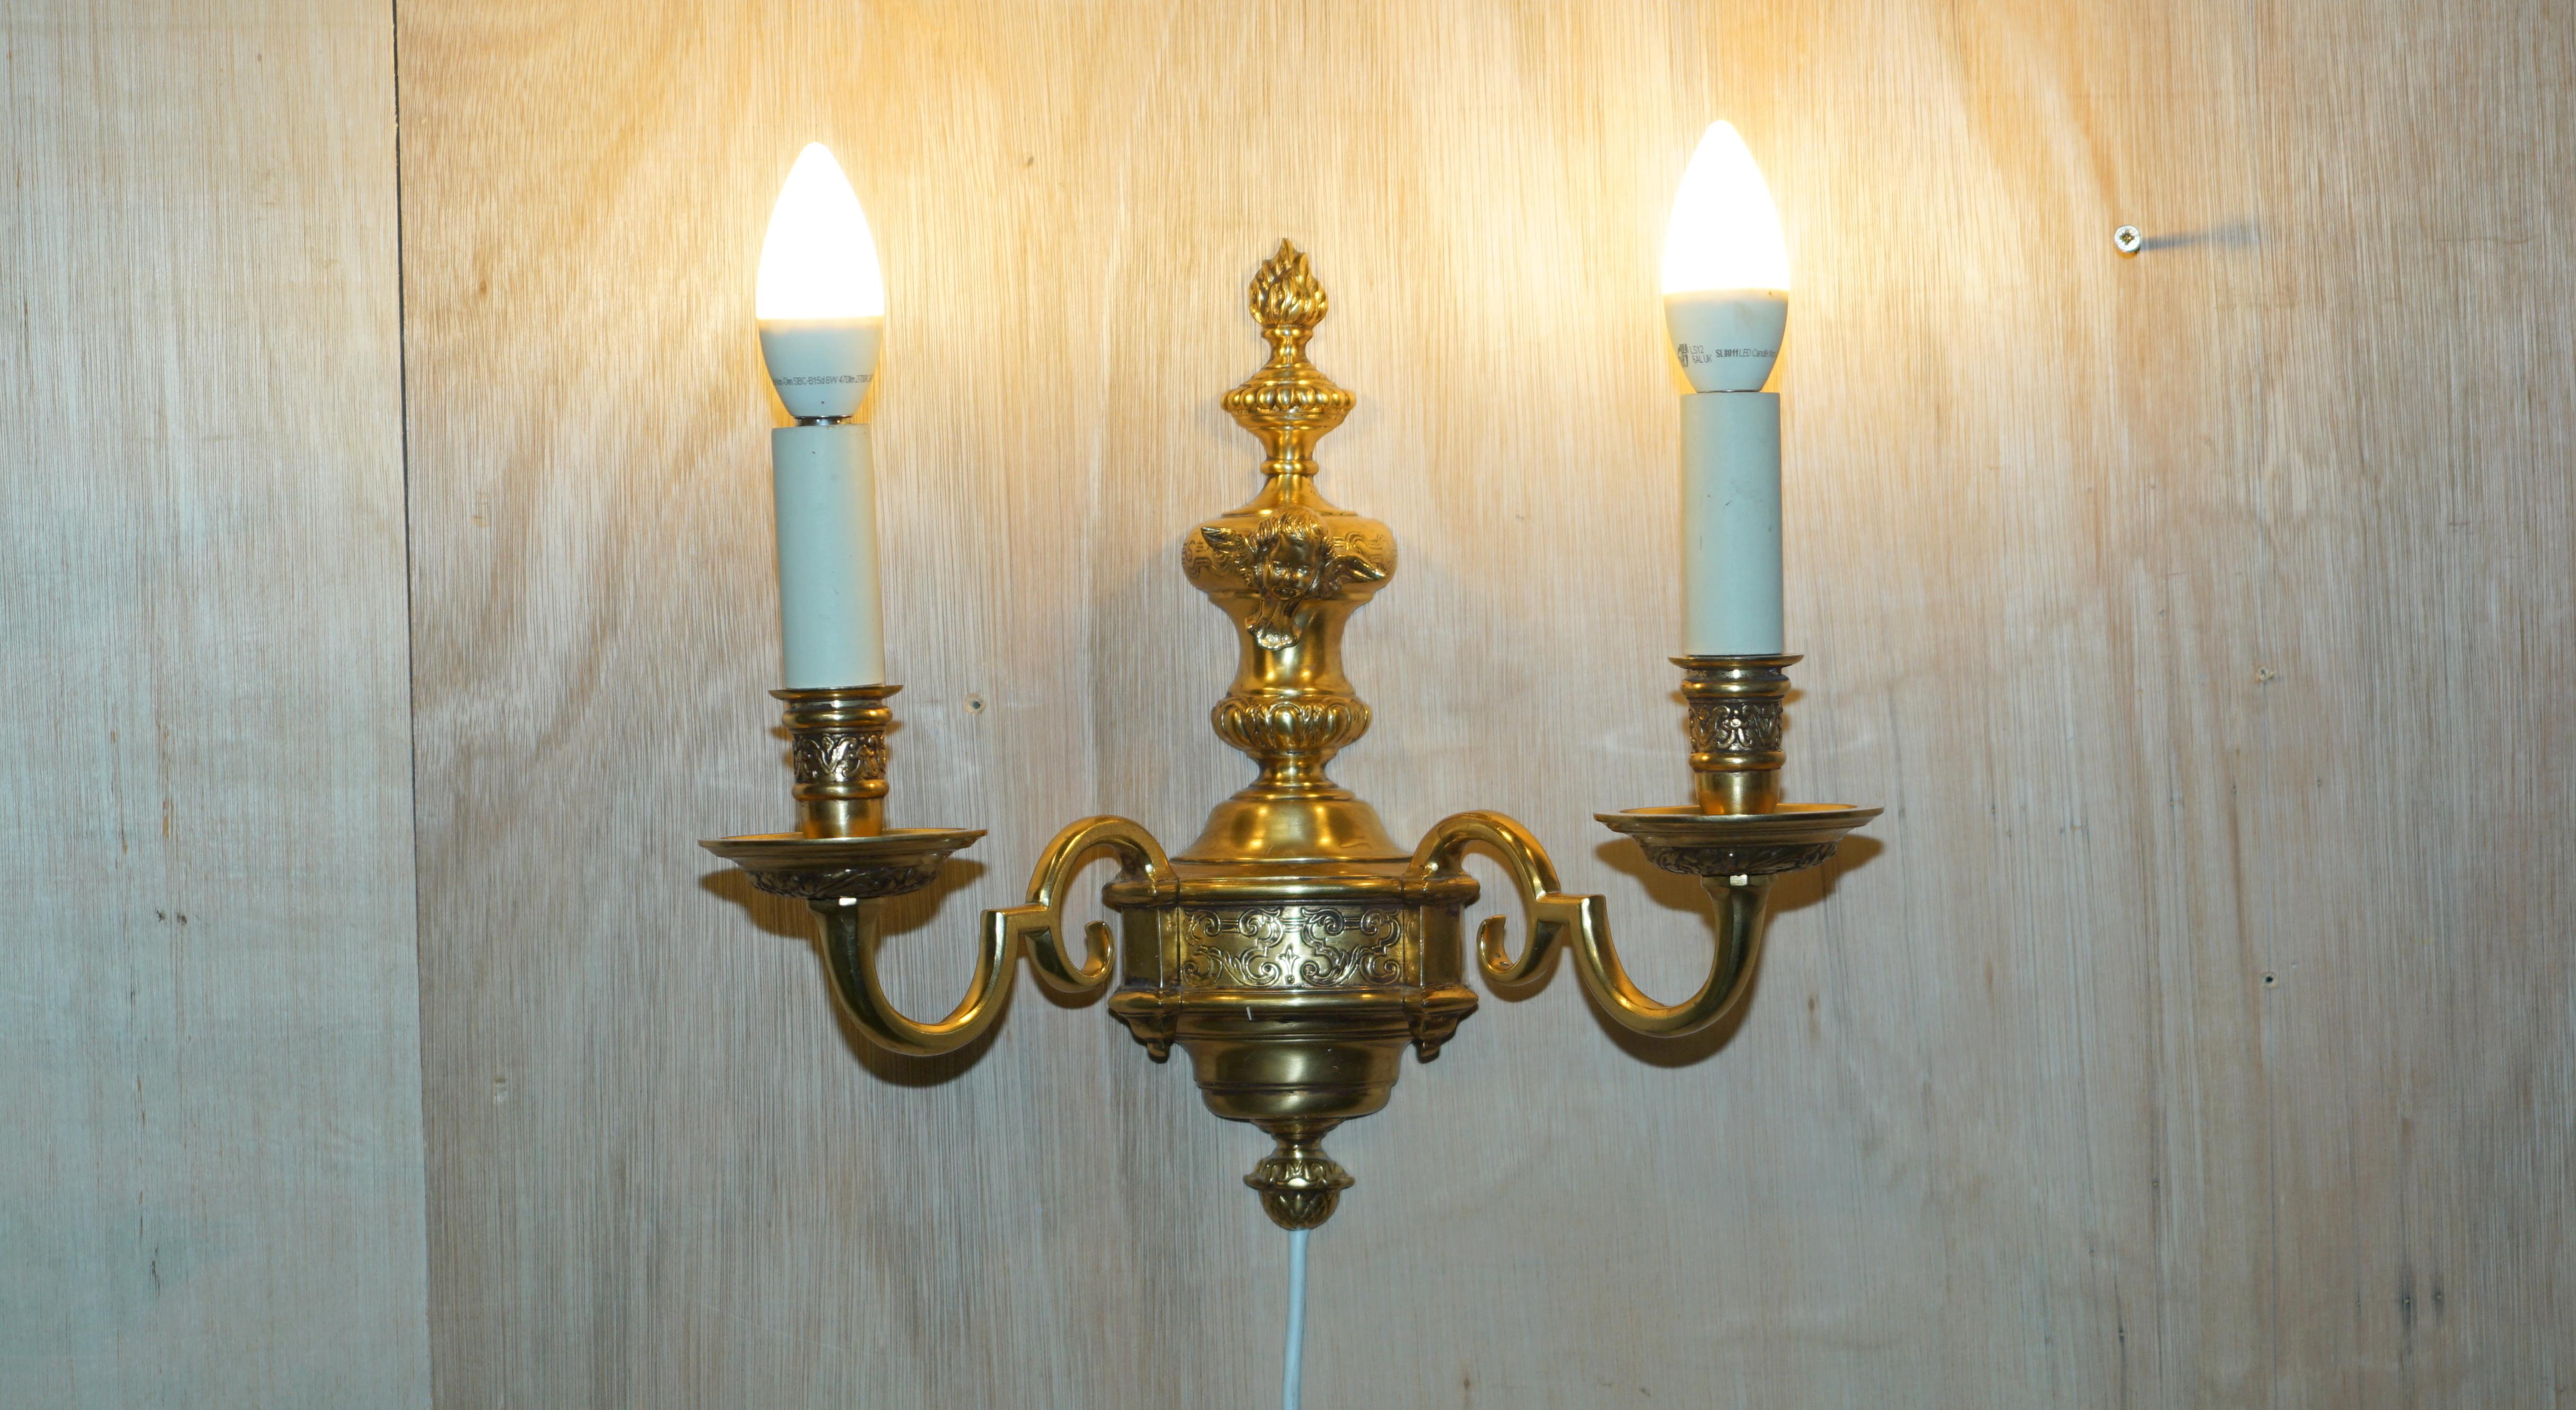 We are delighted to offer for sale this stunning suite of four large antique circa 1900 Gilt Bronze wall sconces which are part of a larger set 

These sconces are part of a set as mentioned, I have these four medium examples, four larger versions